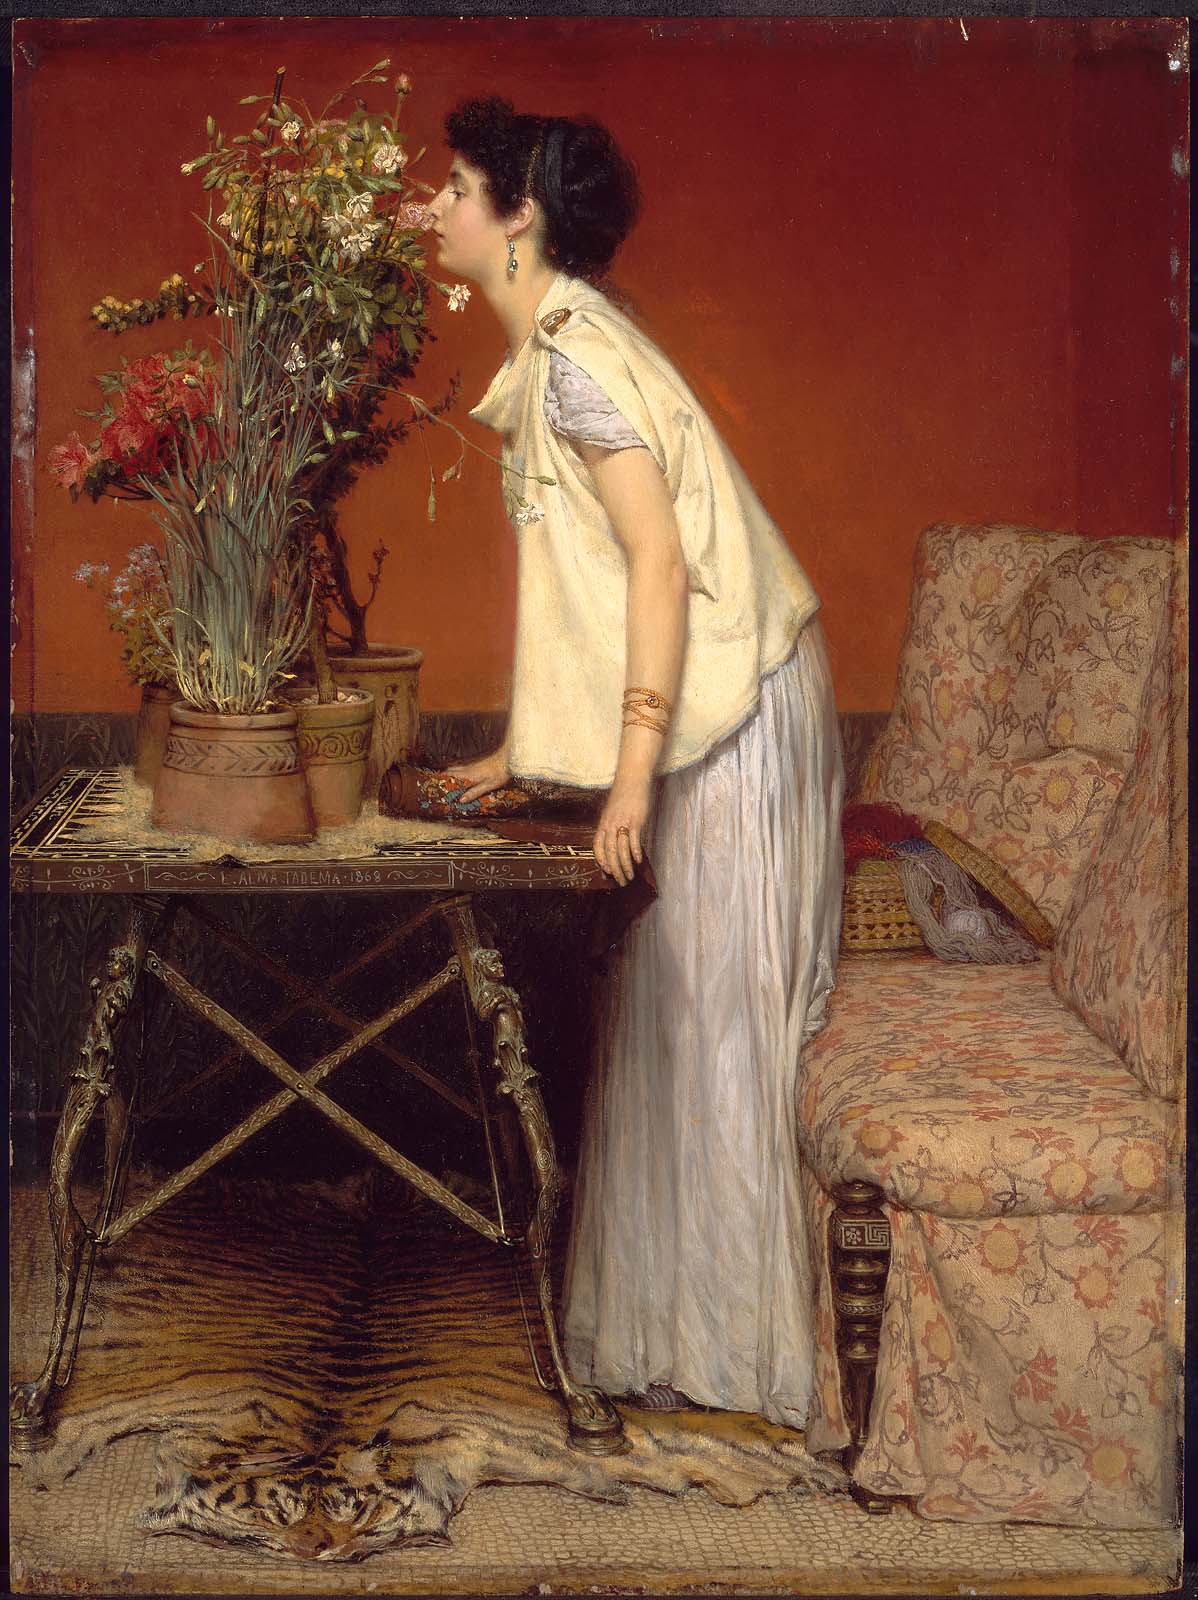 Woman and Flowers by Lawrence Alma-Tadema - 1868 - 49.8 x 37.2 cm Museum of Fine Arts Boston